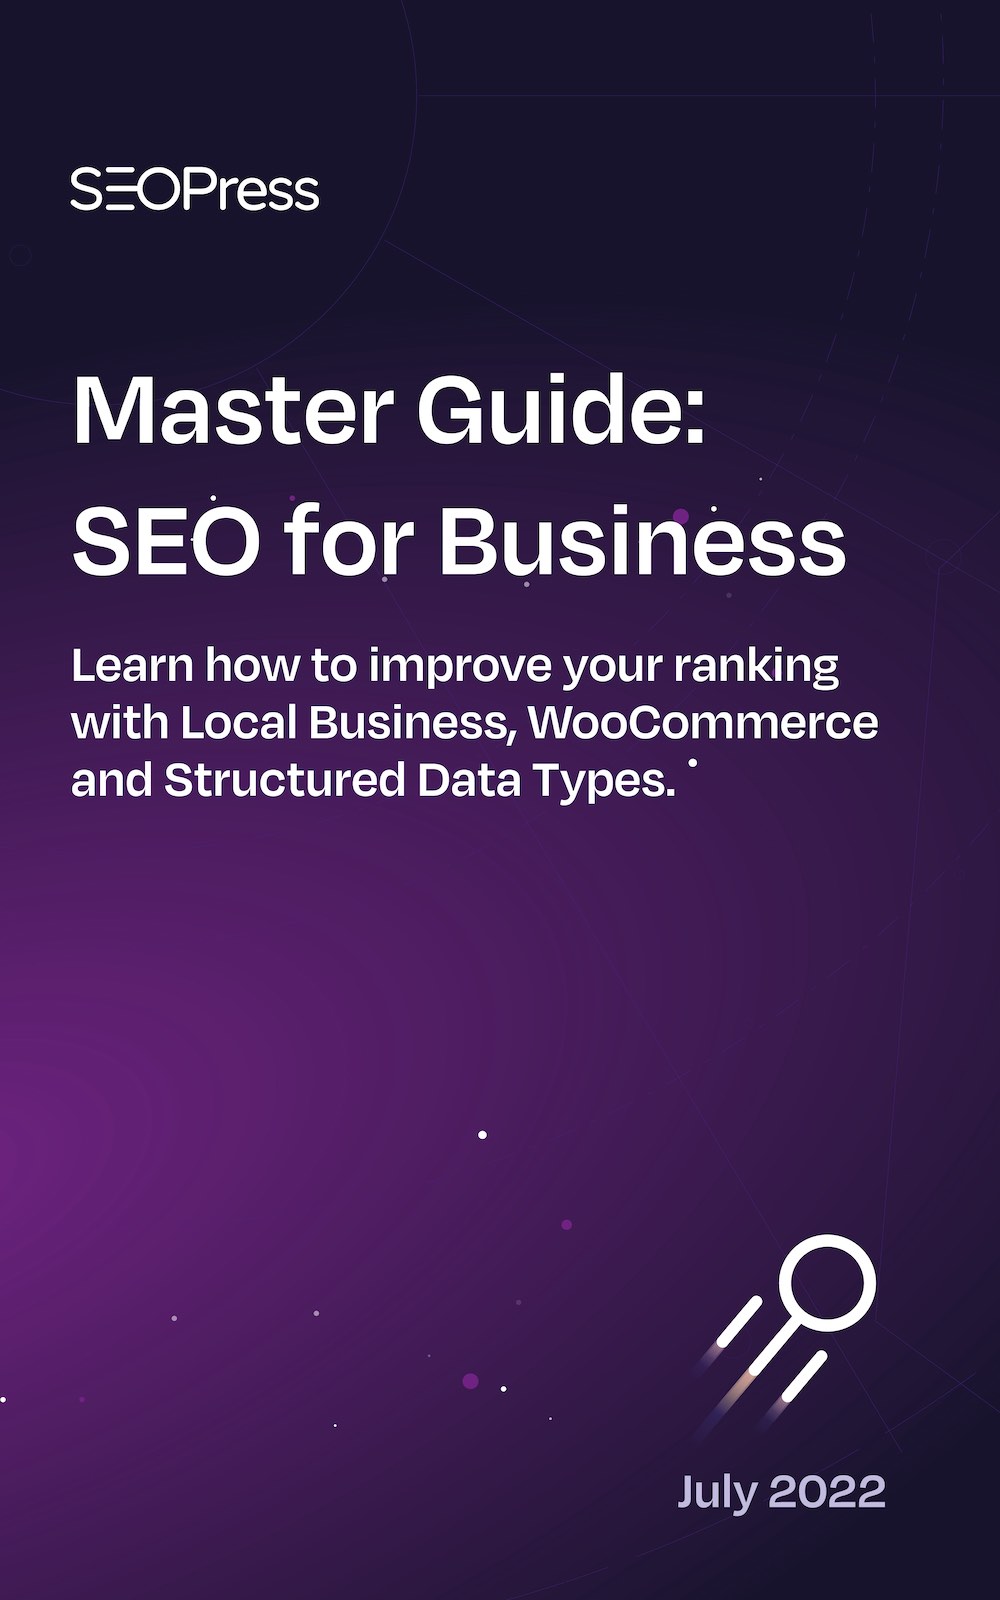 Master Guide: SEO for Business - SEOPress